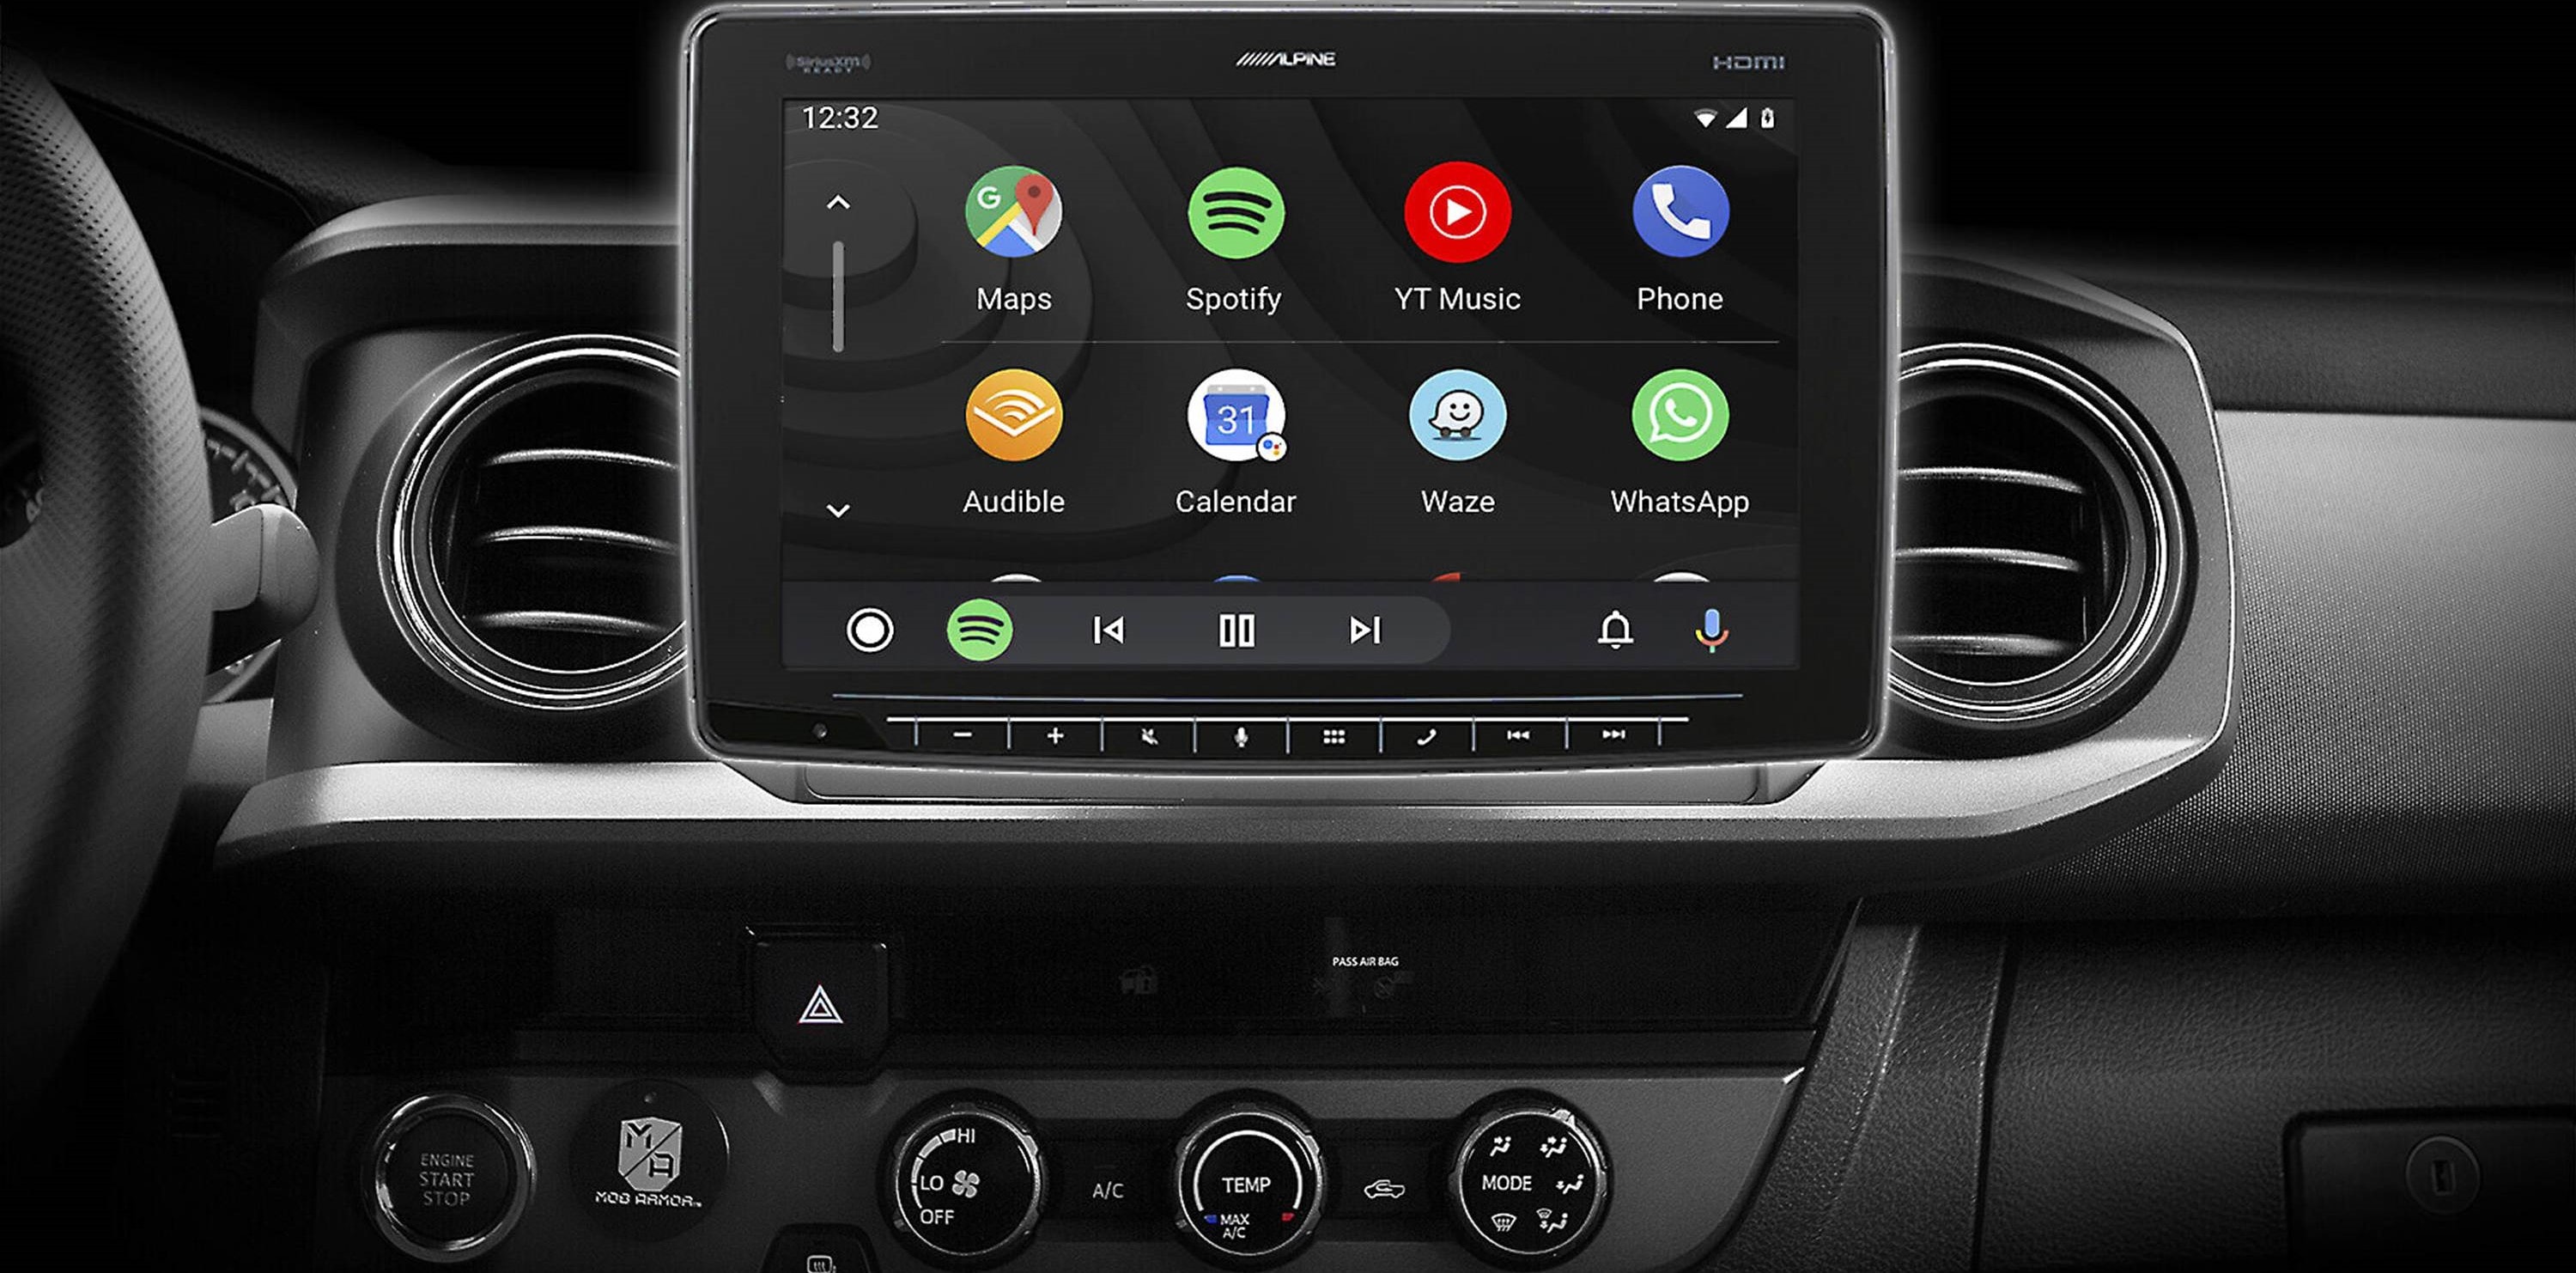 Is Building the Android Auto Rival Google Never Wanted -  autoevolution